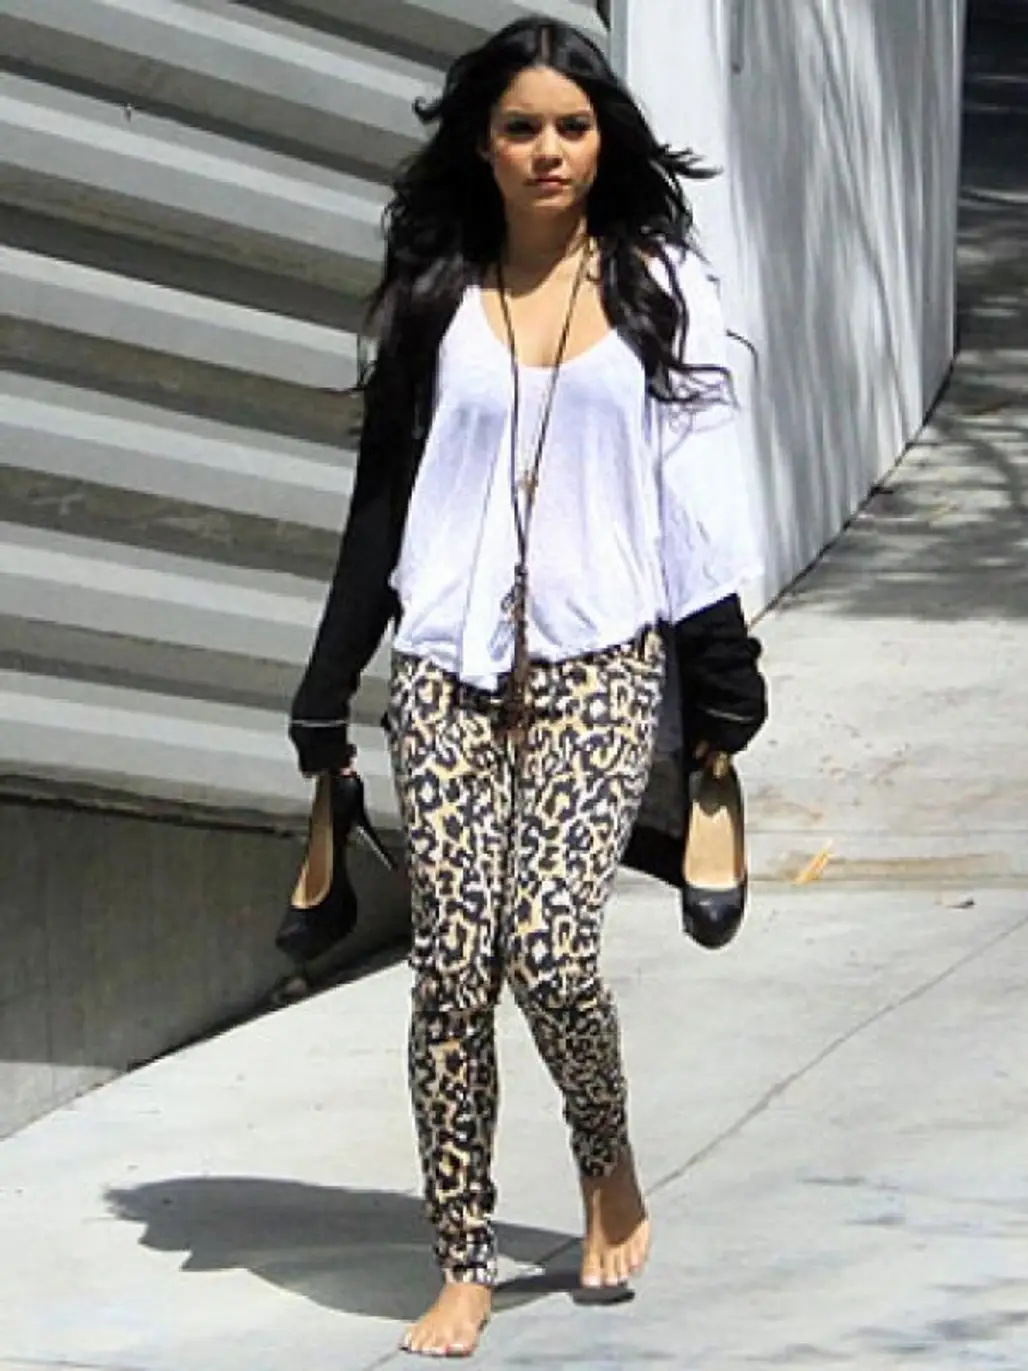 The Best Part about Printed Leggings (and Pants) is That You Can Dress Them up or down, as Seen on Vanessa Hudgens